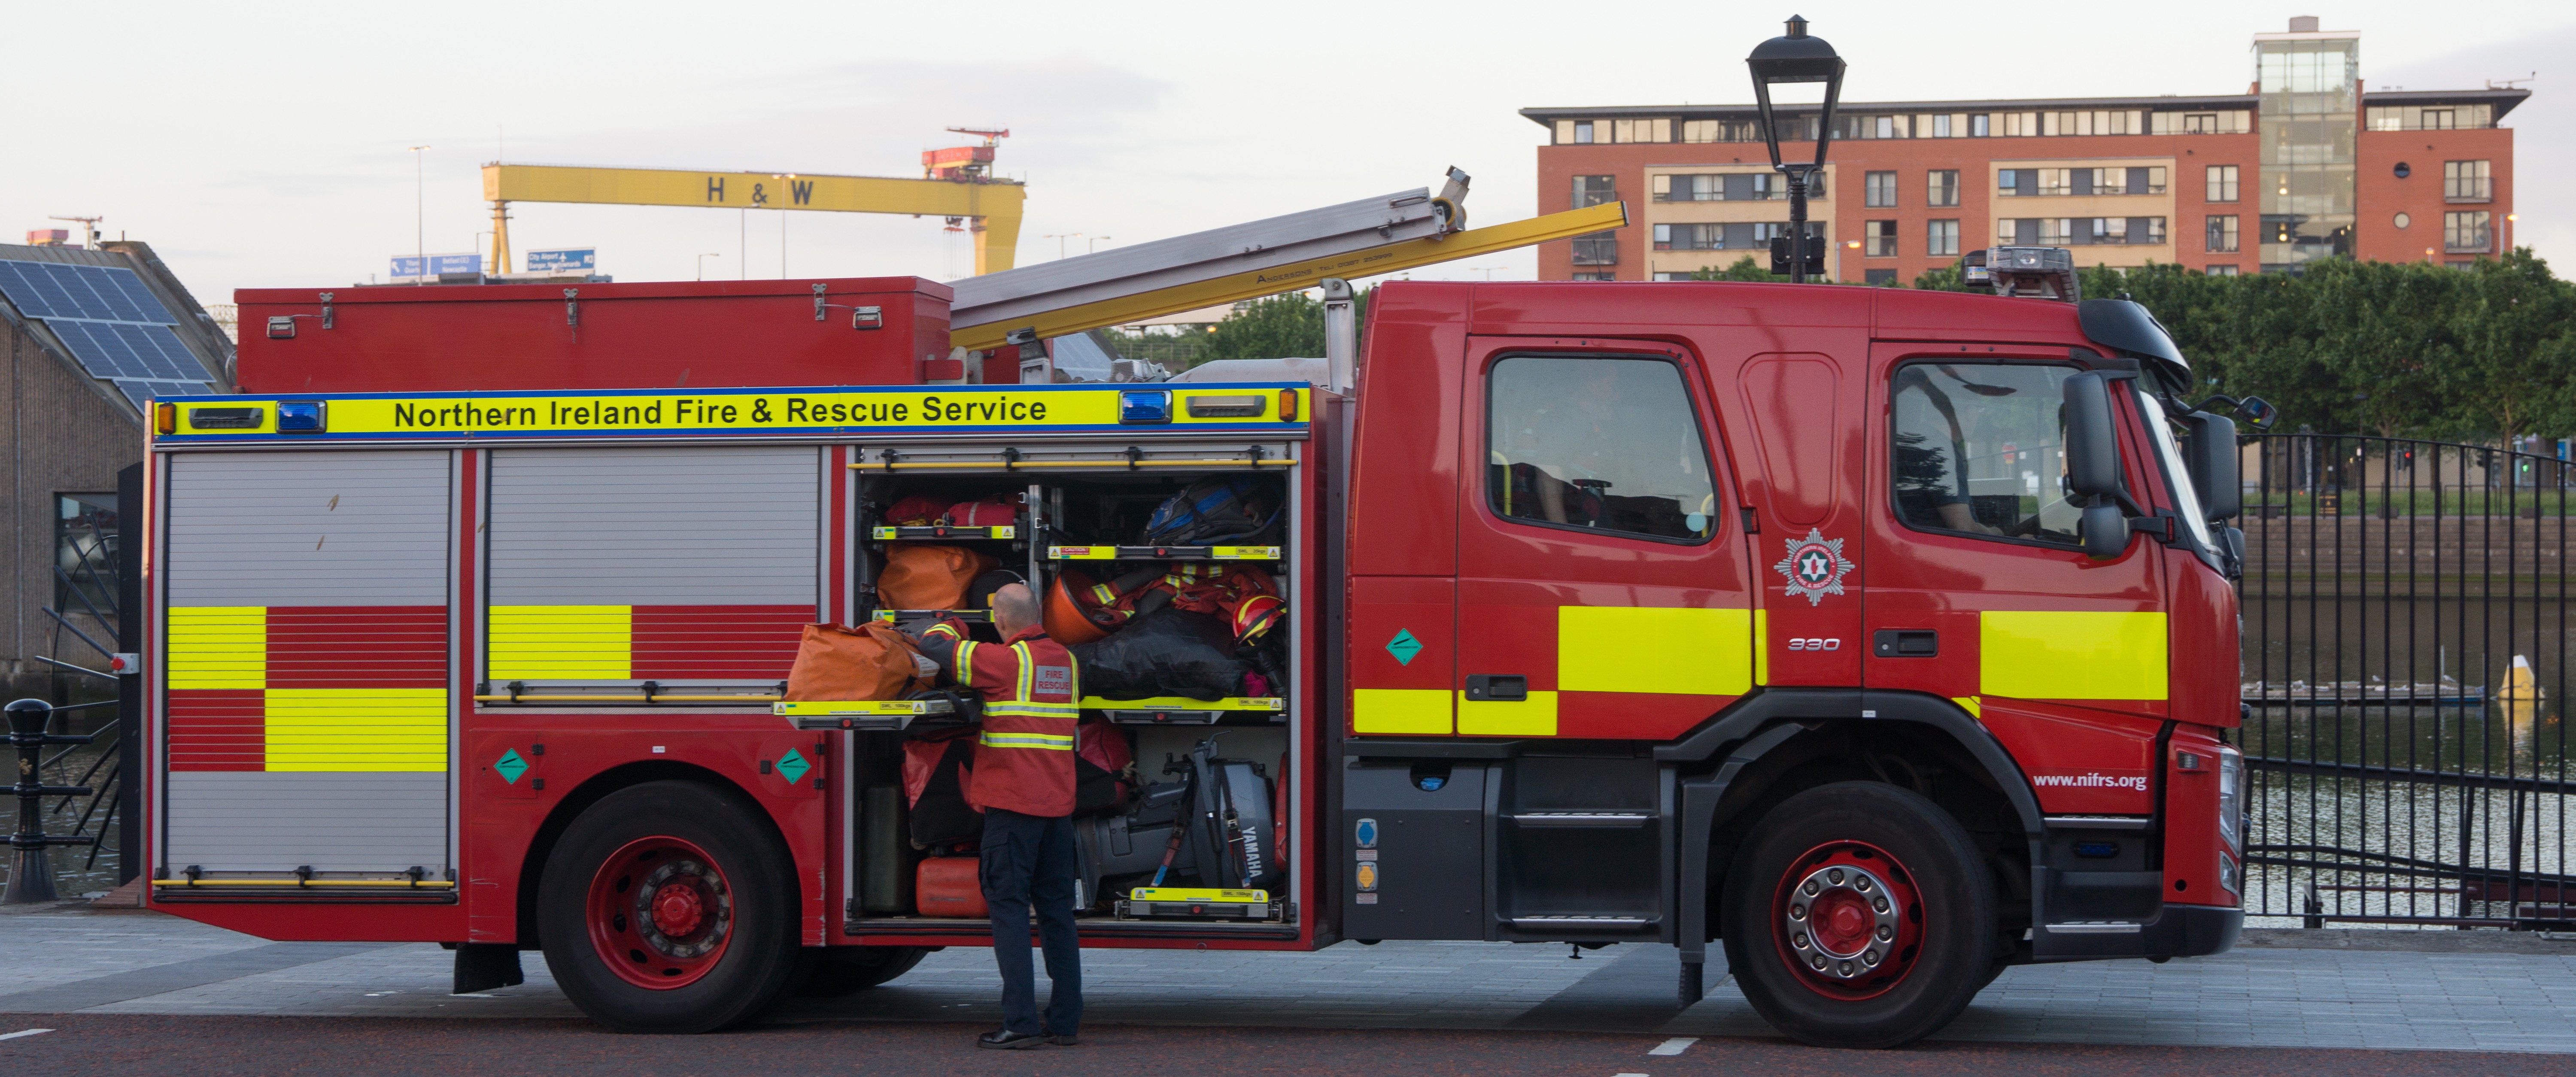 NORTHERN IRELAND FIRE AND RESCUE SERVICE IN BELFAST  005